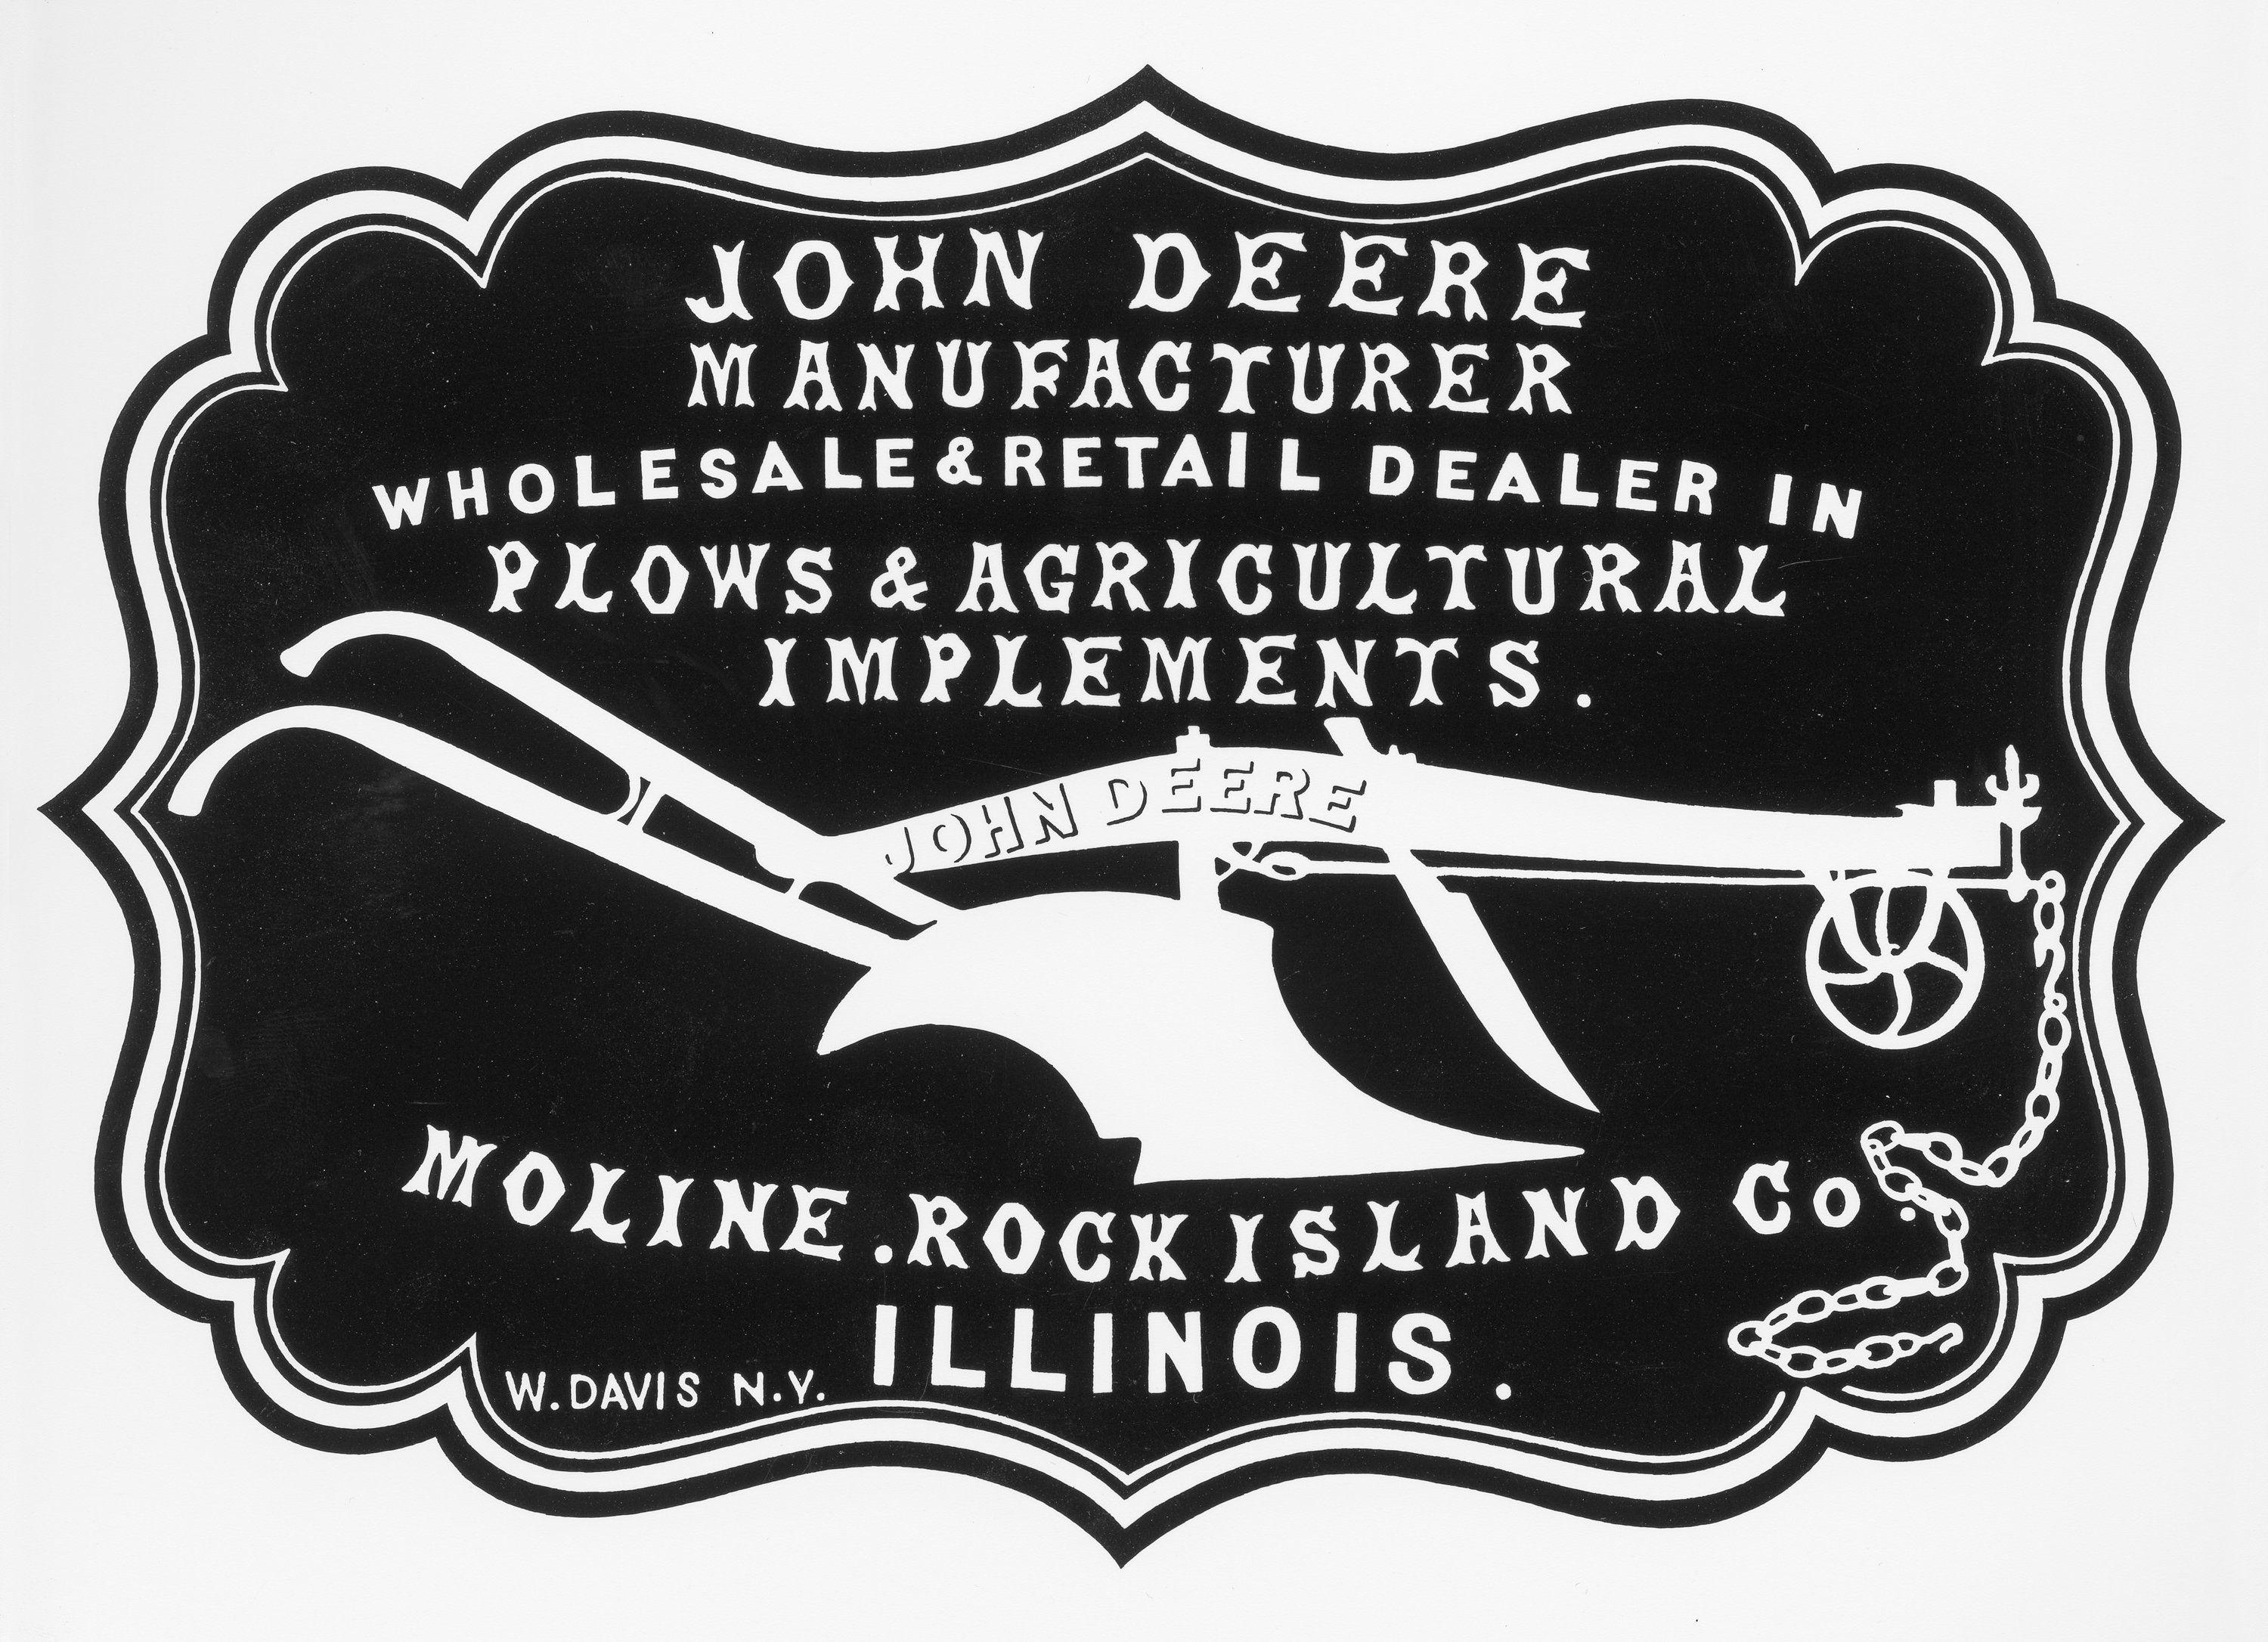 Deere and Company Logo - The Deere & Company logo from the from the company's 1855 stationary ...